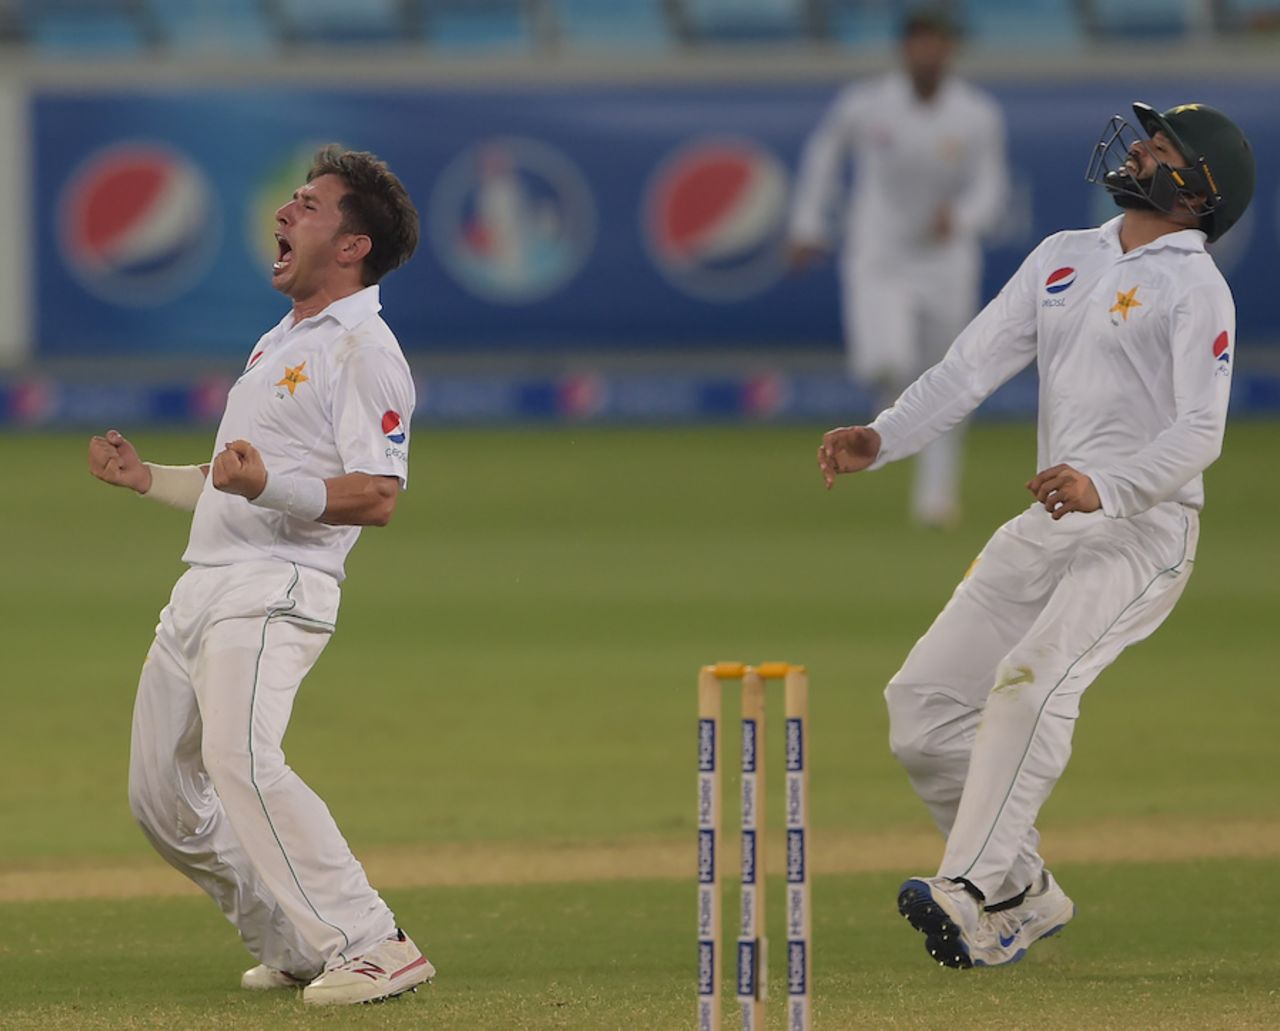 Yasir Shah celebrates after taking a stunning catch, Pakistan v West Indies, 1st Test, Dubai, 5th day, October 17, 2016